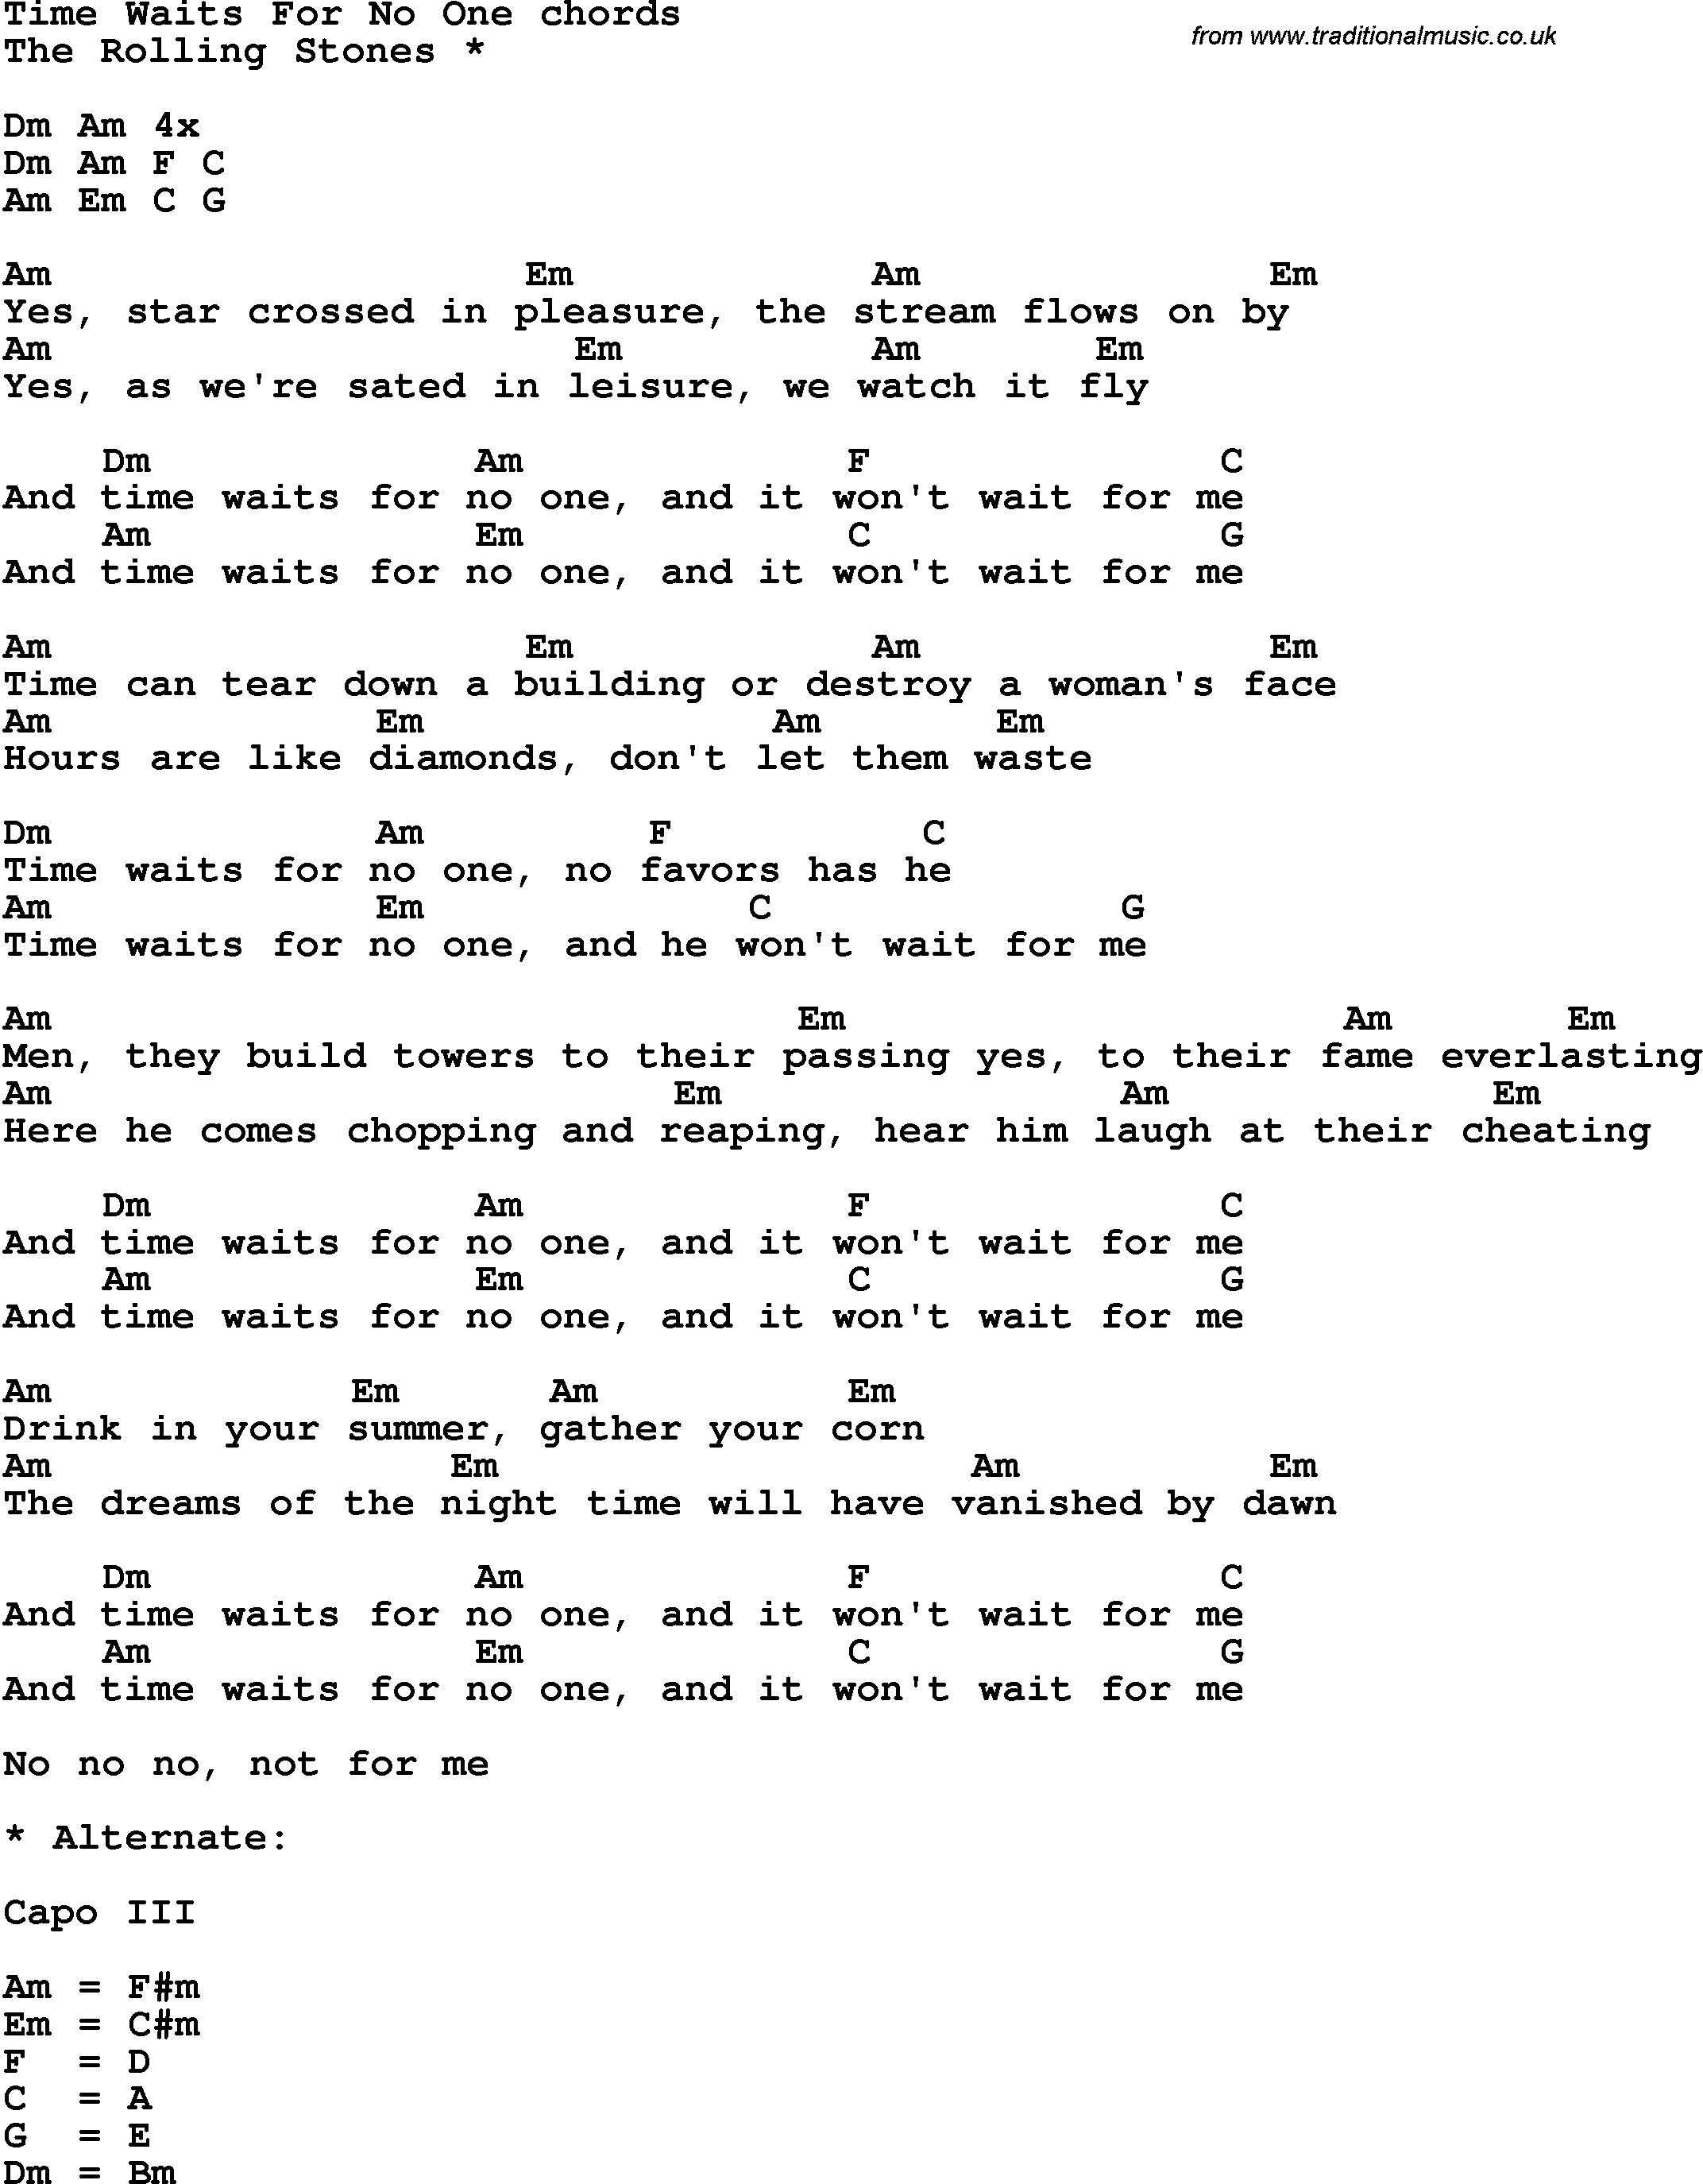 Song Lyrics with guitar chords for Time Waits For No One